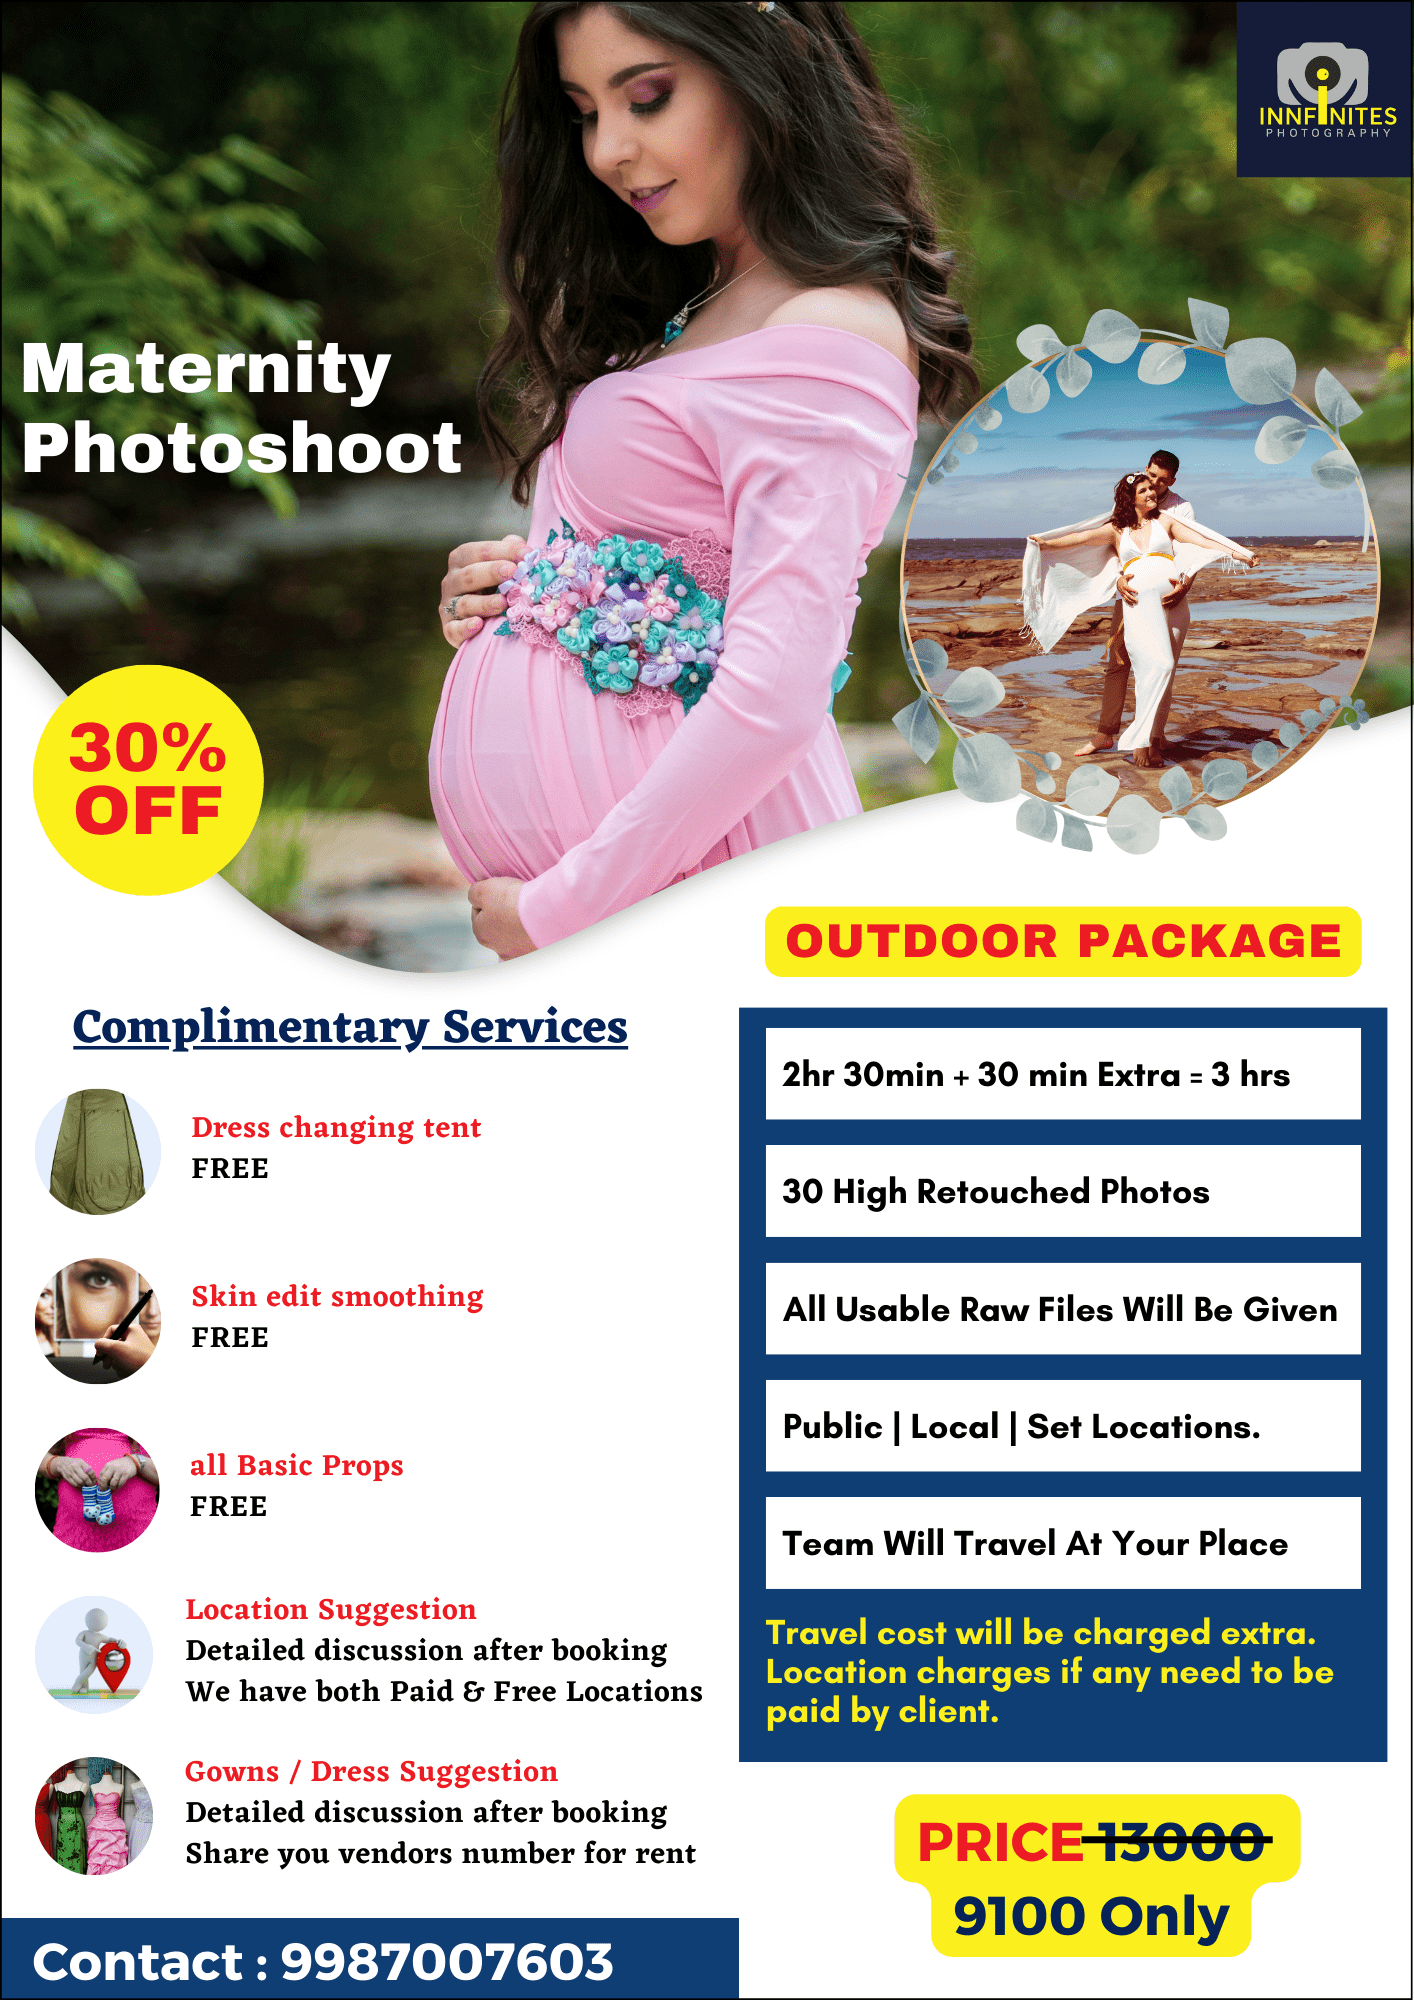 maternity-photoshoot-outdoor-package